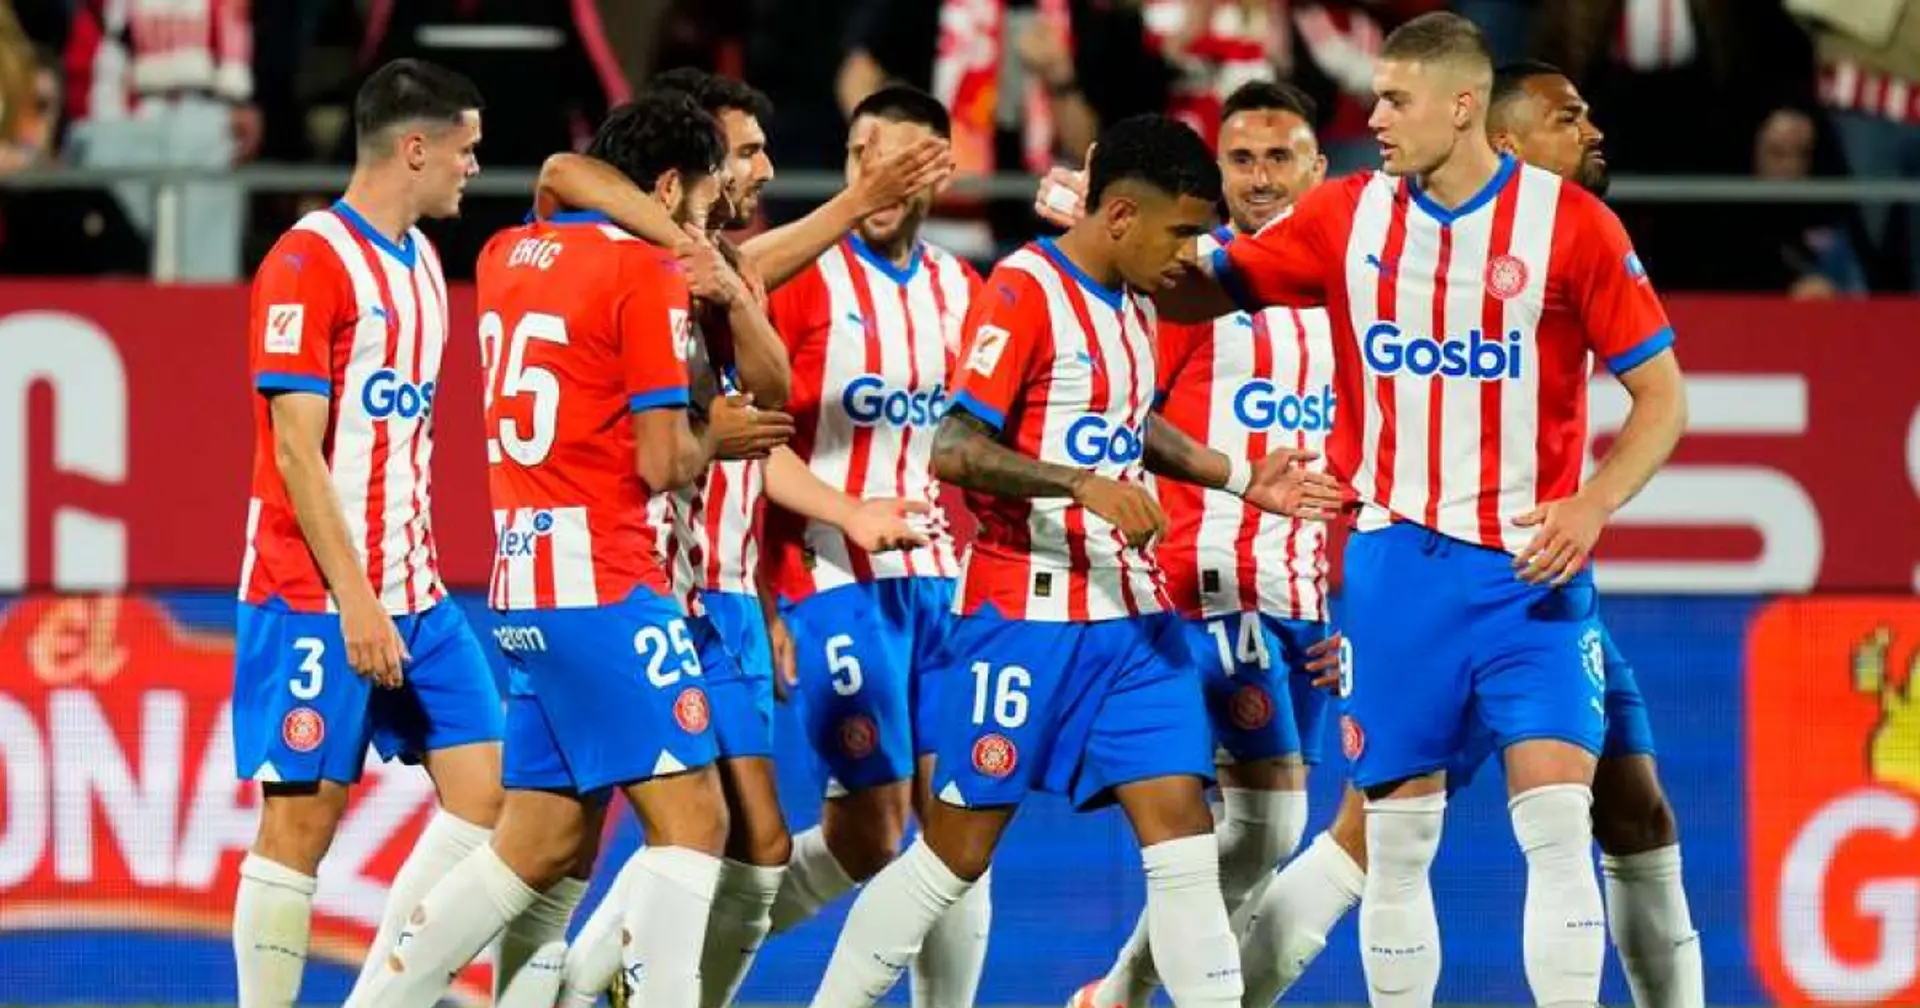 Girona secure first-ever European qualification after defeating Cadiz in La Liga